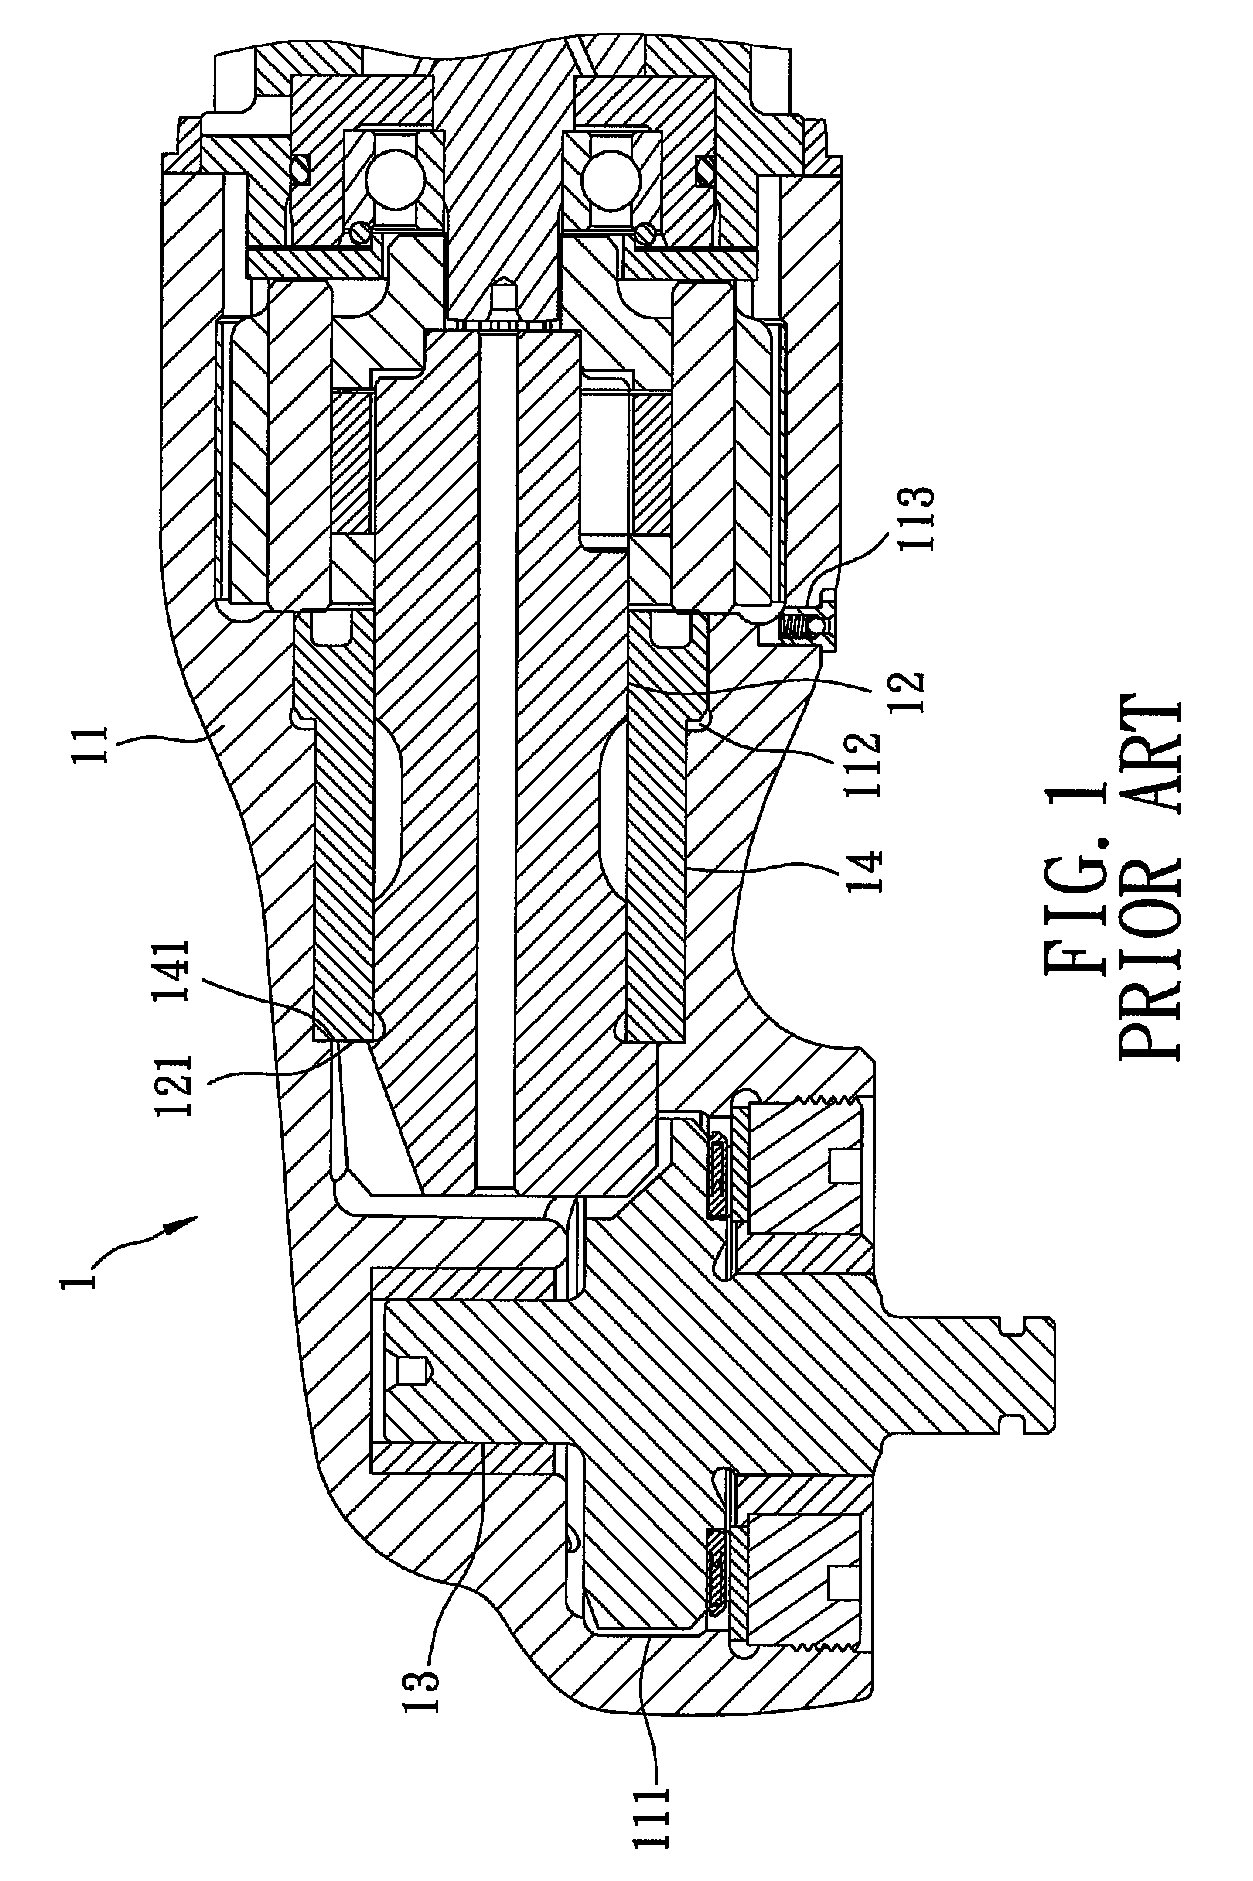 Pneumatic impact tool having two oil inlets